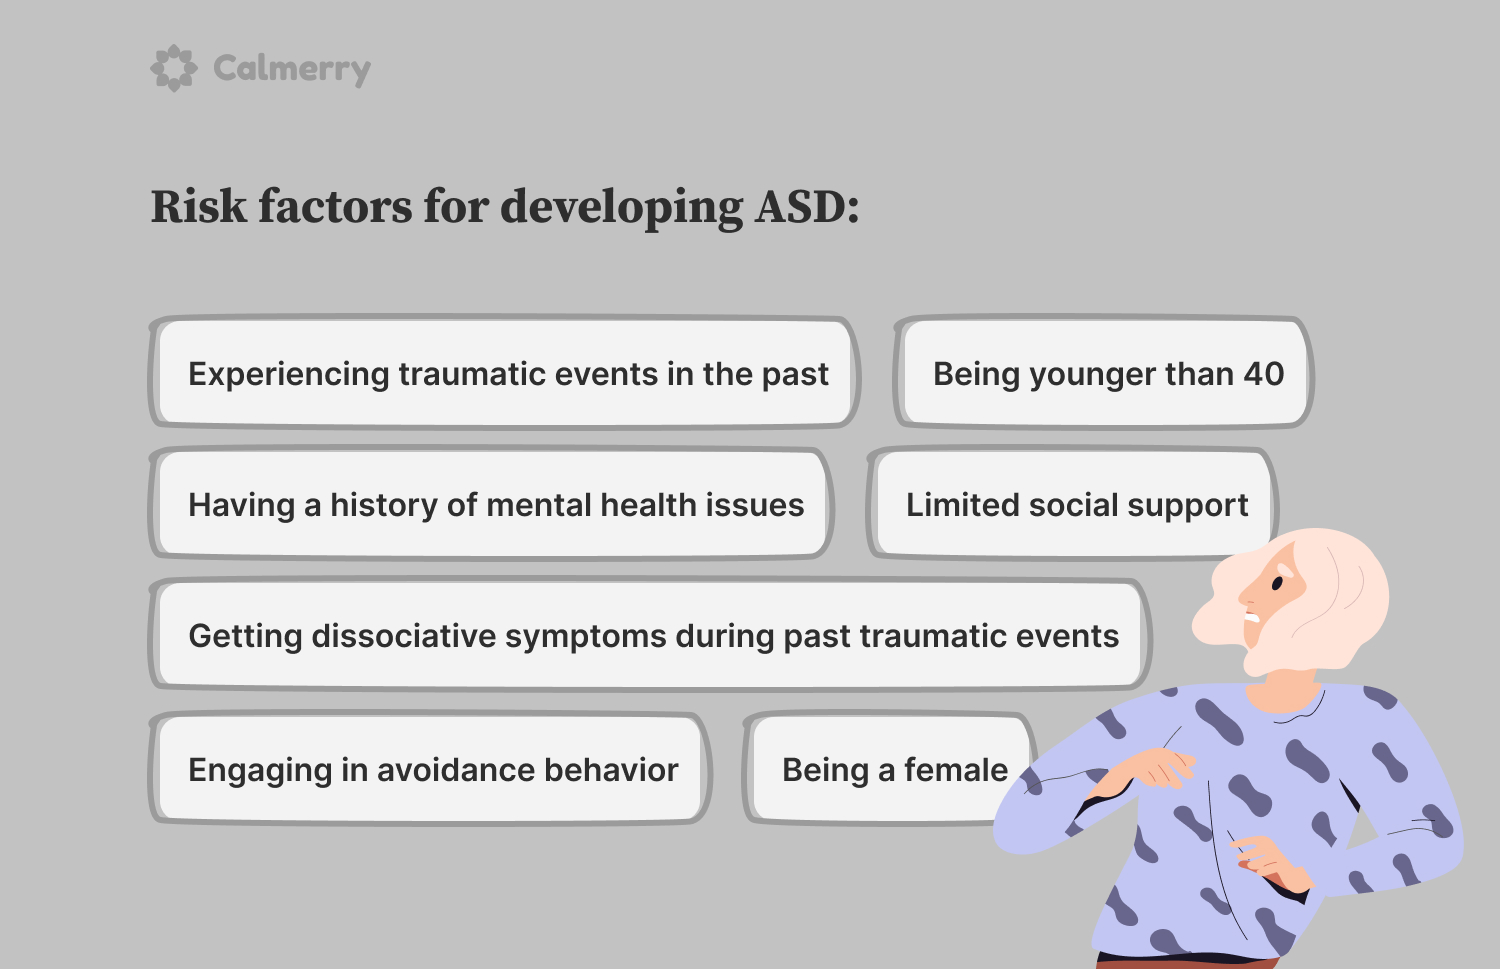 Although everyone can develop ASD, there are certain risk factors that can increase the odds